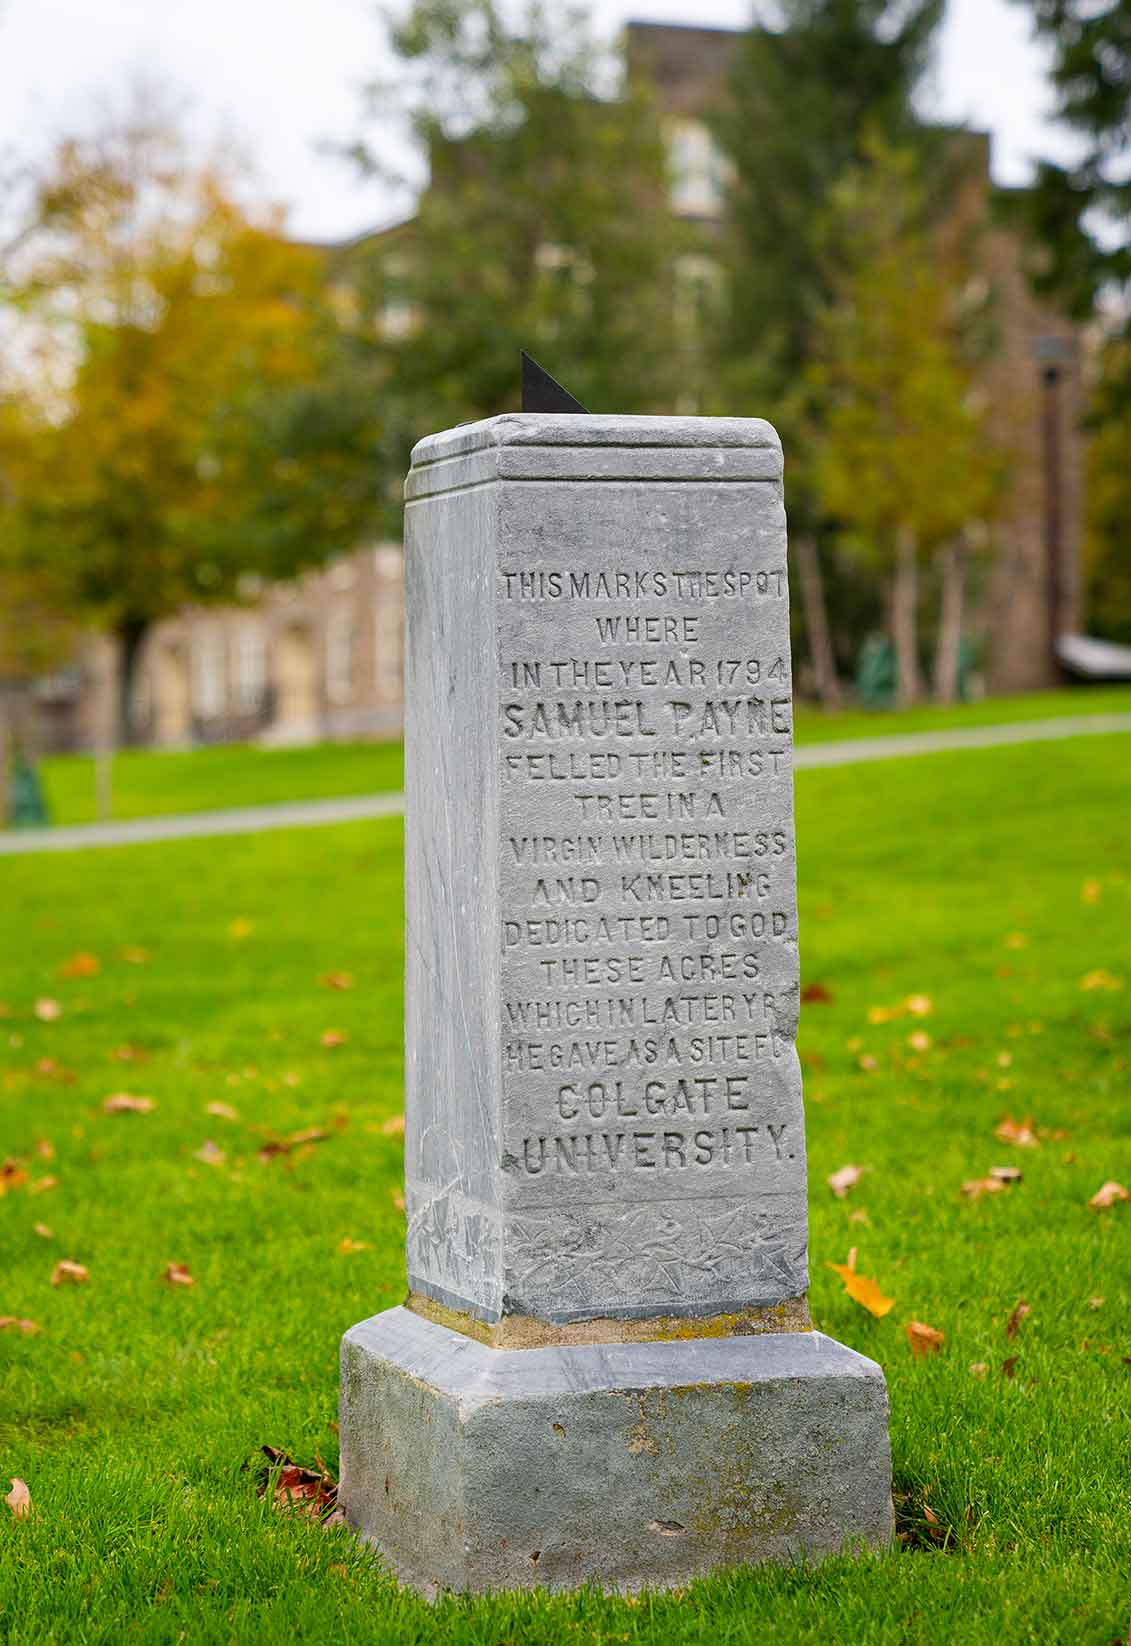 Stone Monument that reads This marks the spot where in the year 1794 Samuel Payne Felled the first tree in a virgin wilderness and kneeling dedicated to God these acres which in later years he gave as a site for Colgate University